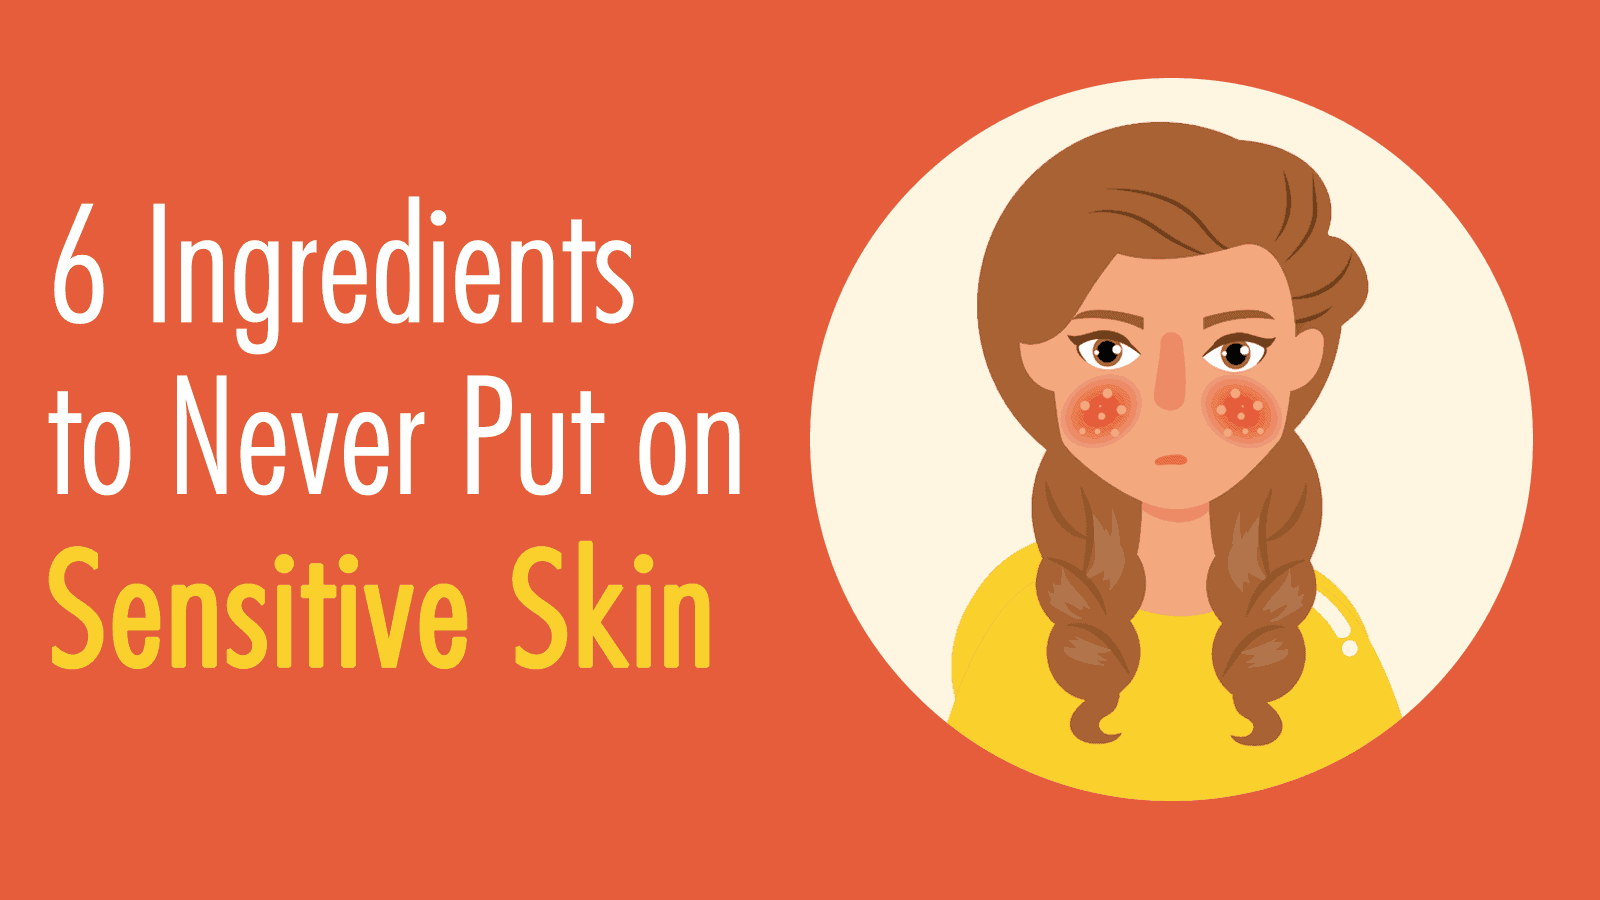 6 Ingredients to Never Put on Sensitive Skin